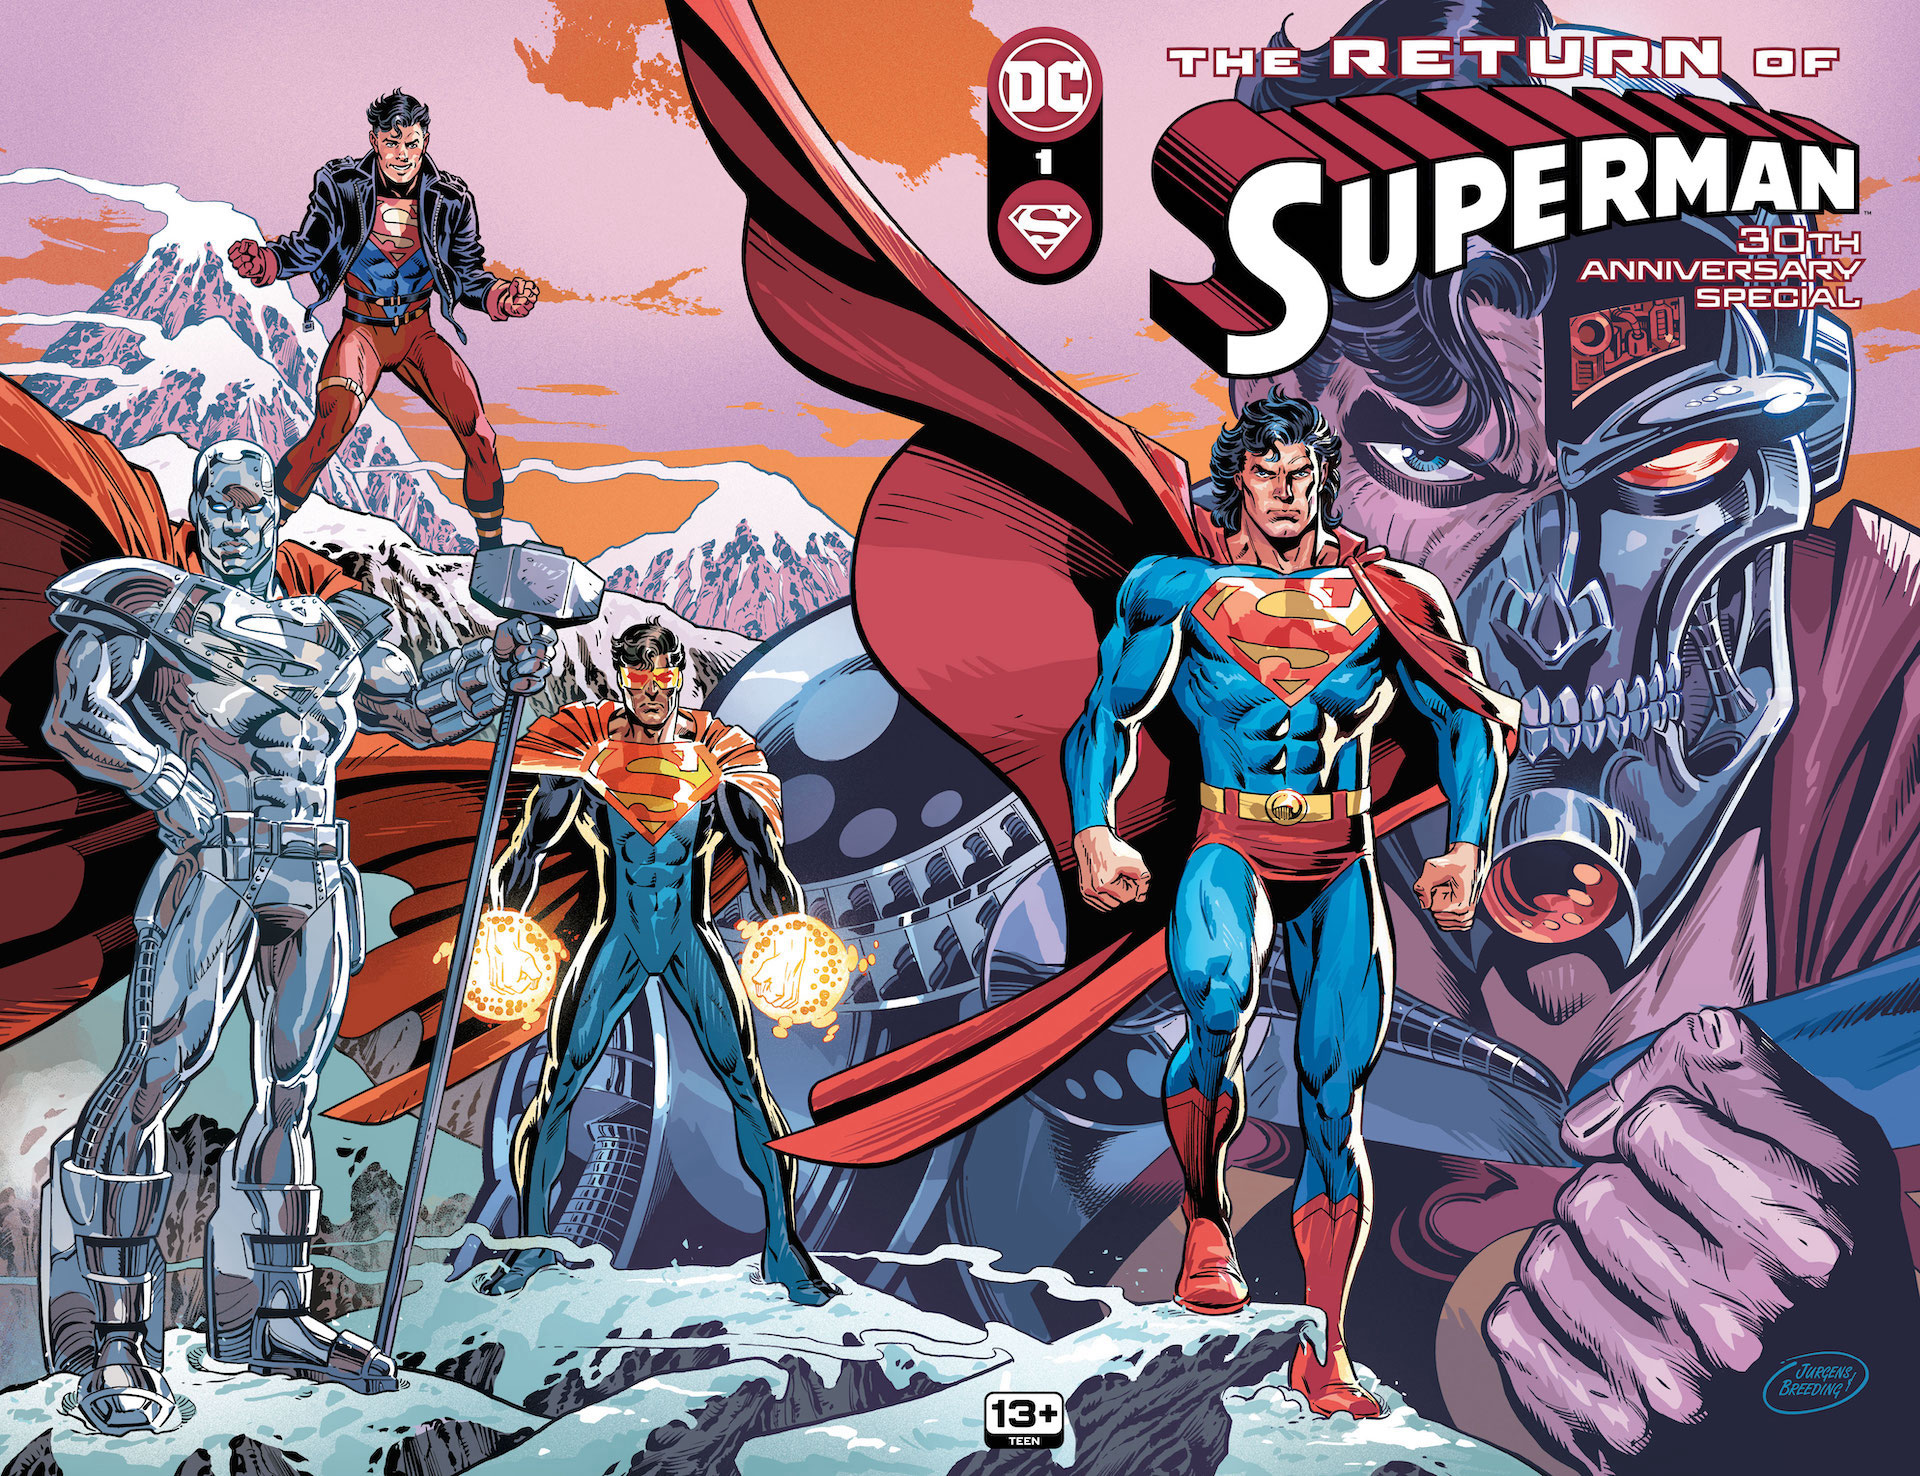 DC Preview: Return of Superman 30th Anniversary Special #1